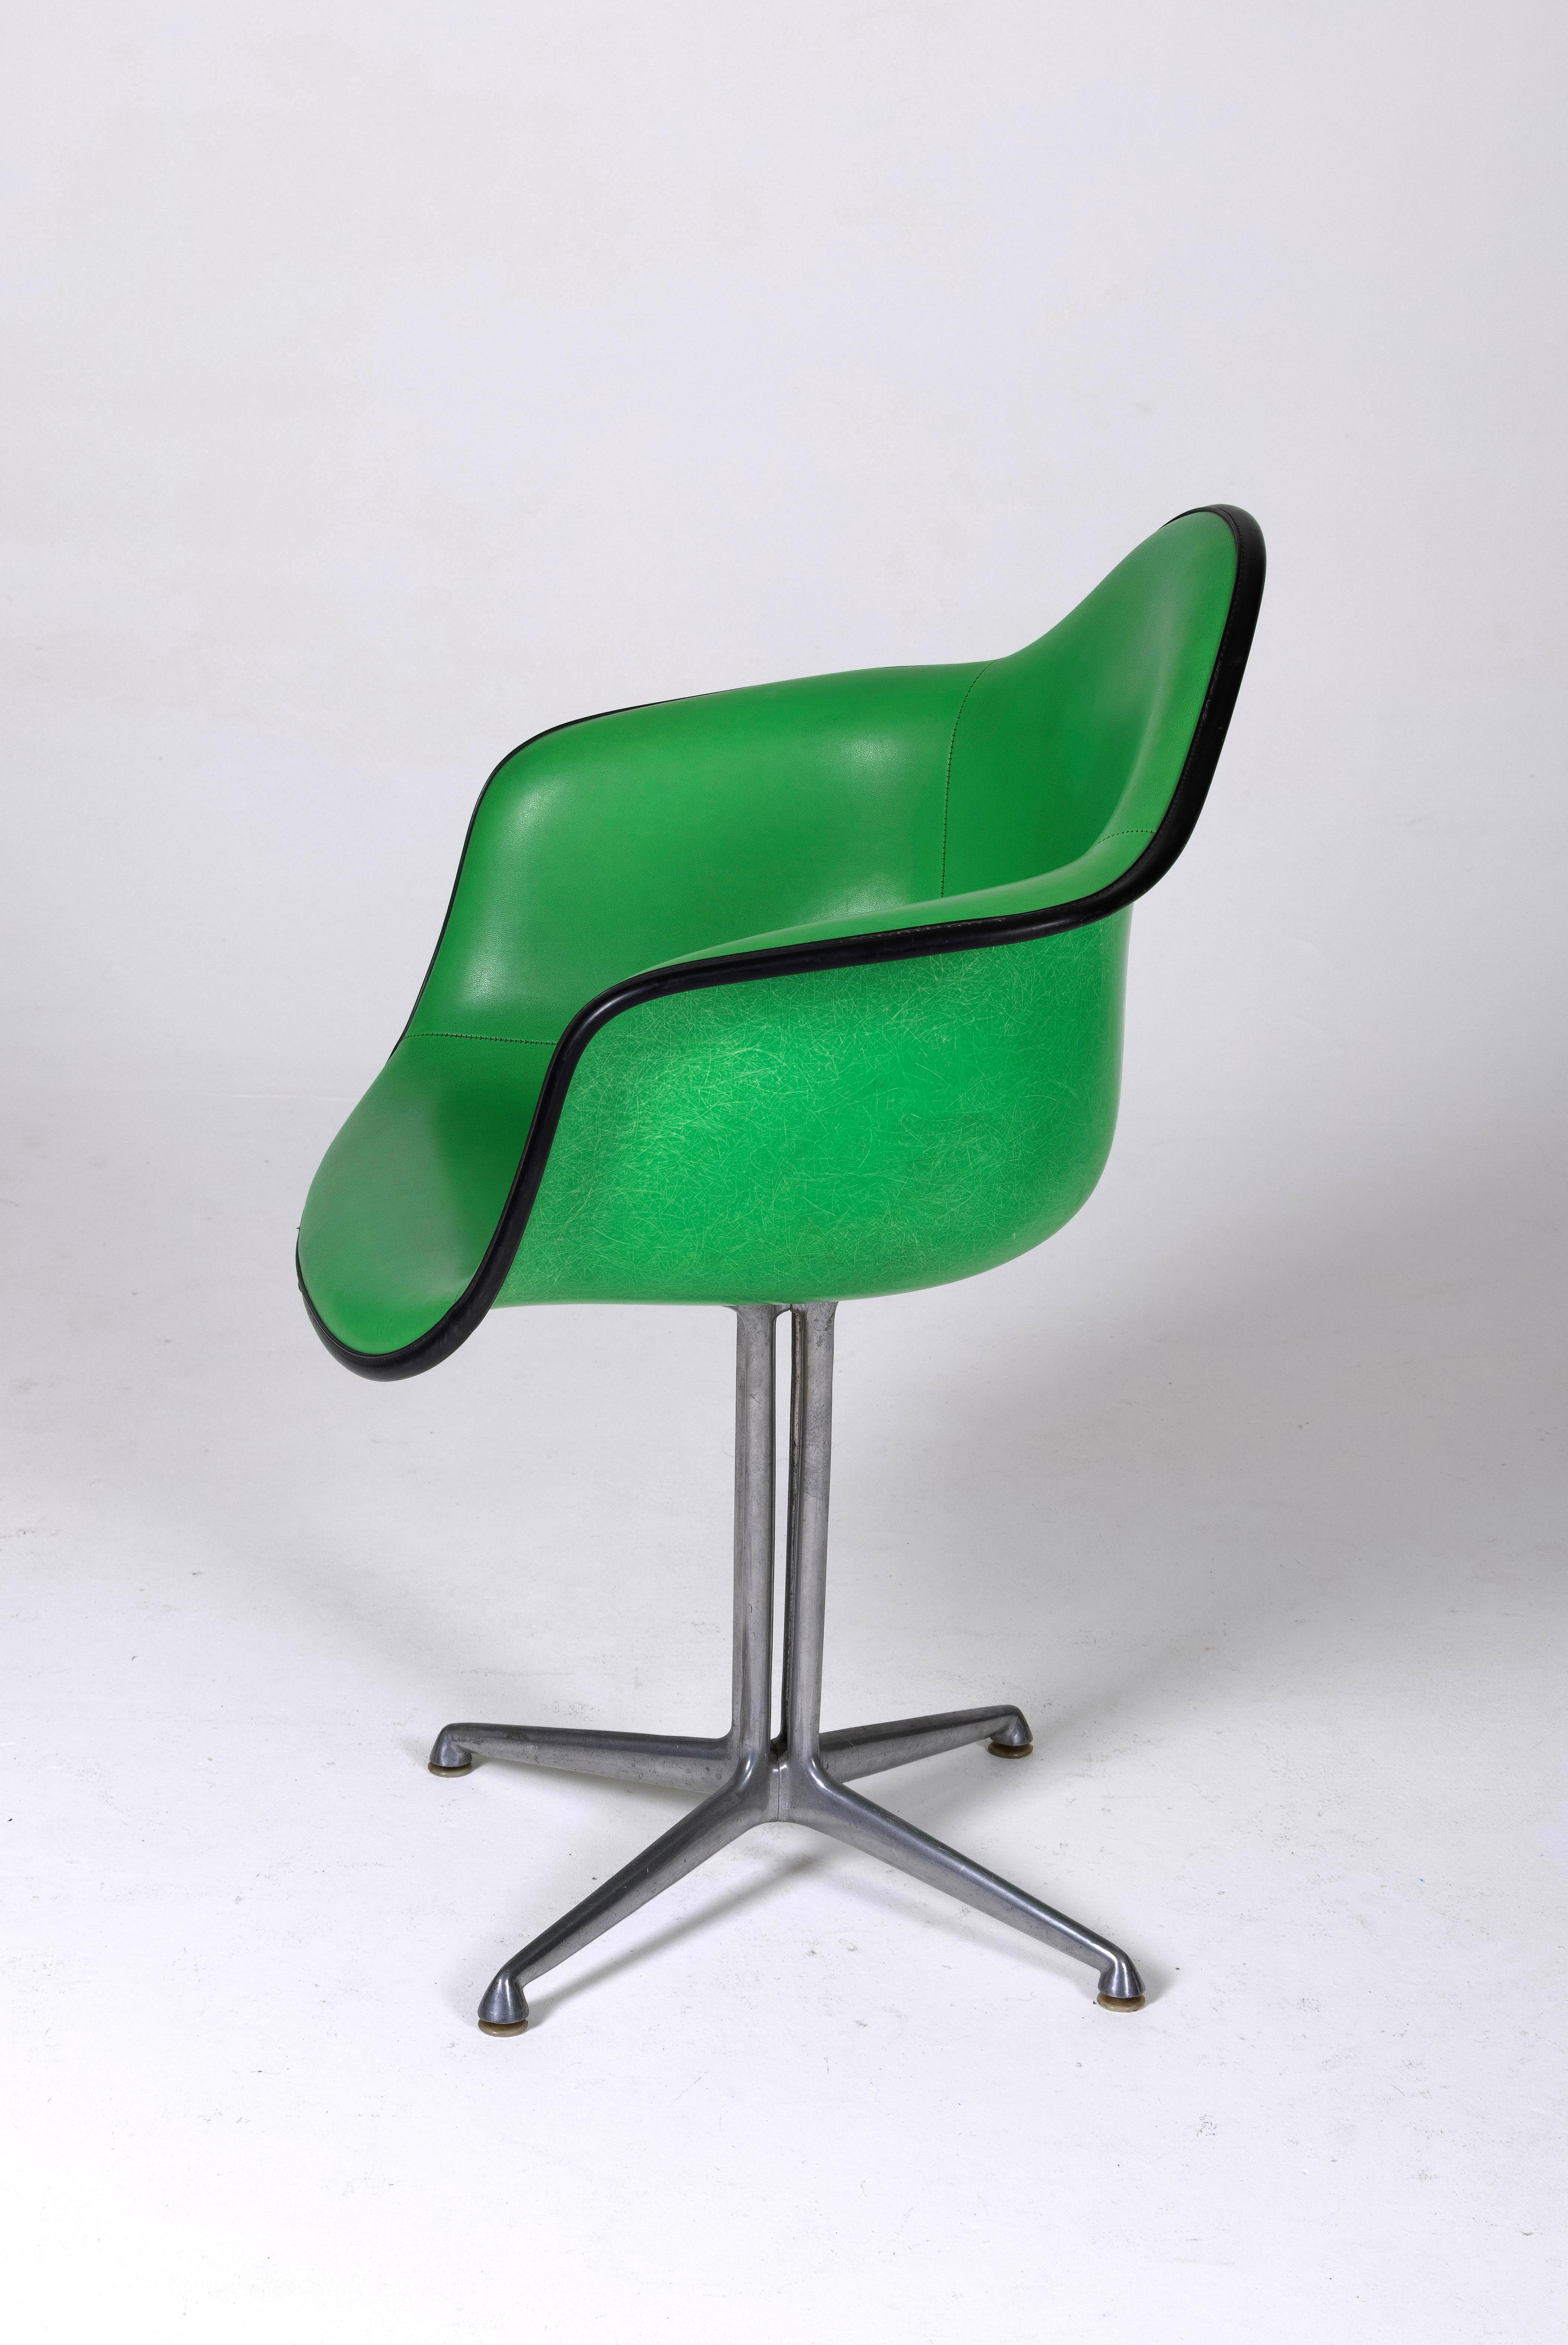 Mid-20th Century Charles and Ray Eames' Eames Plastic leather armchair.